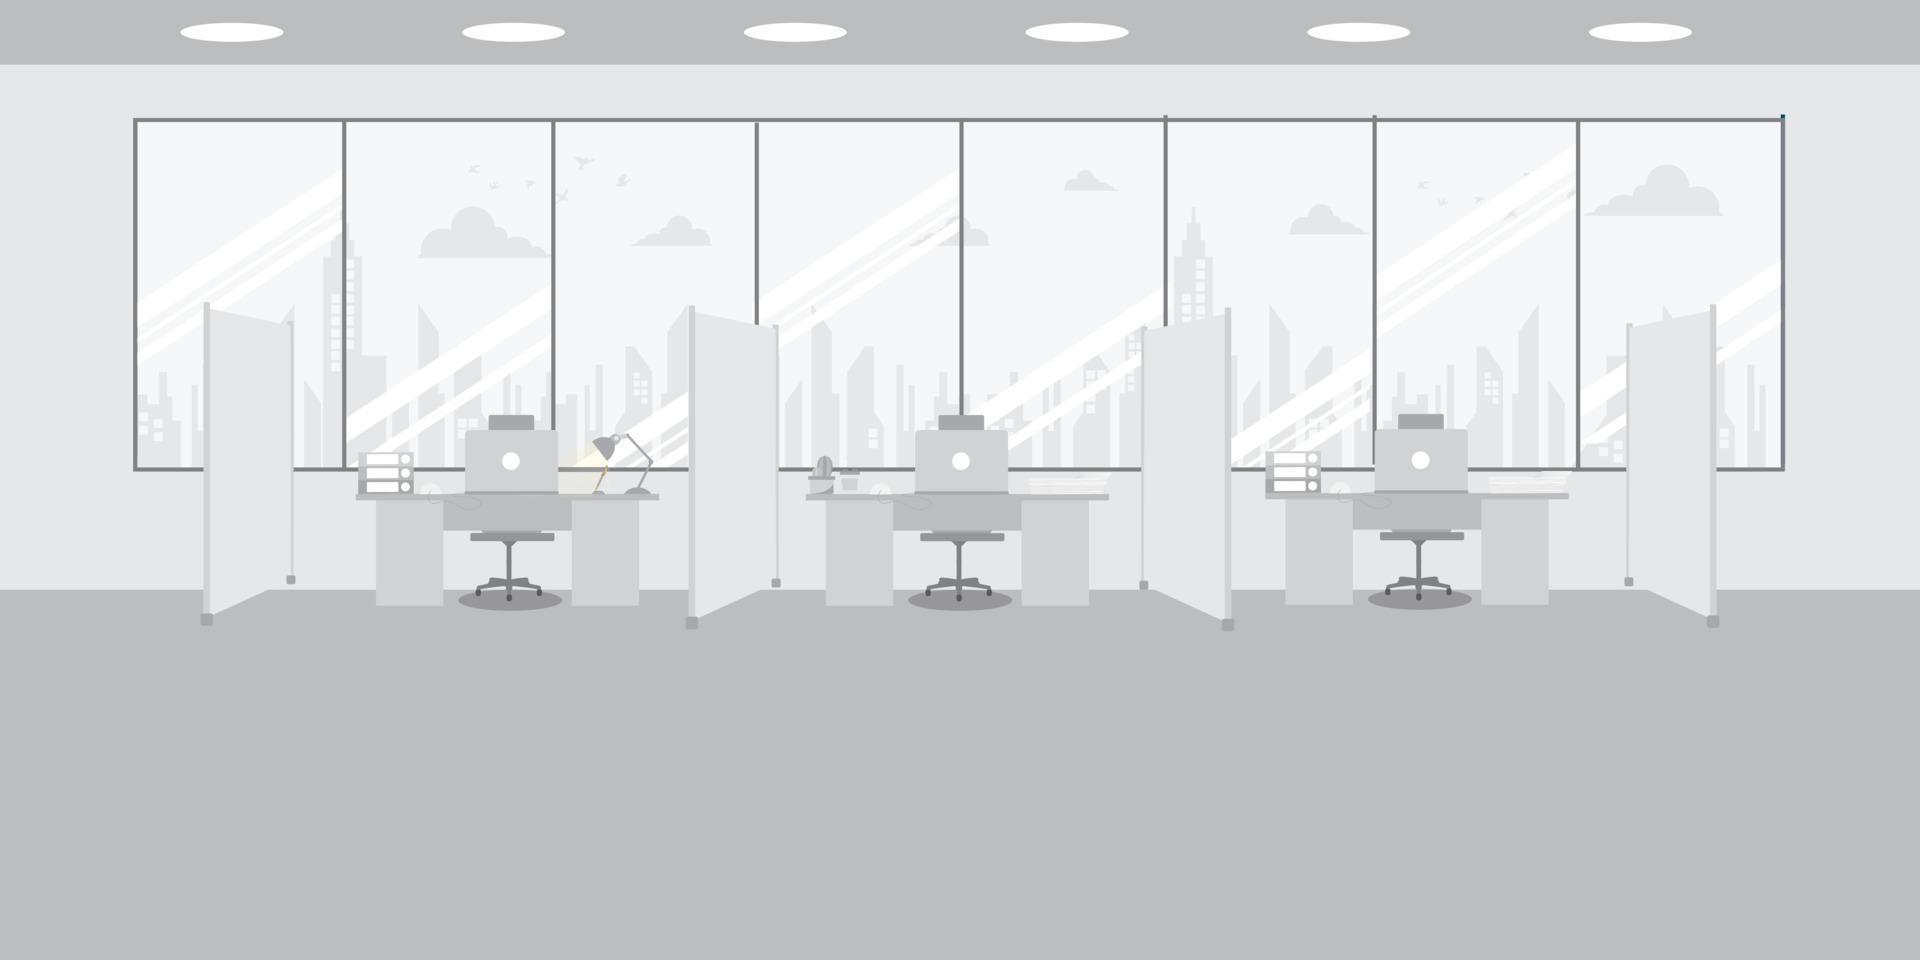 Modern office interior with gray color background. Creative office workspace vector